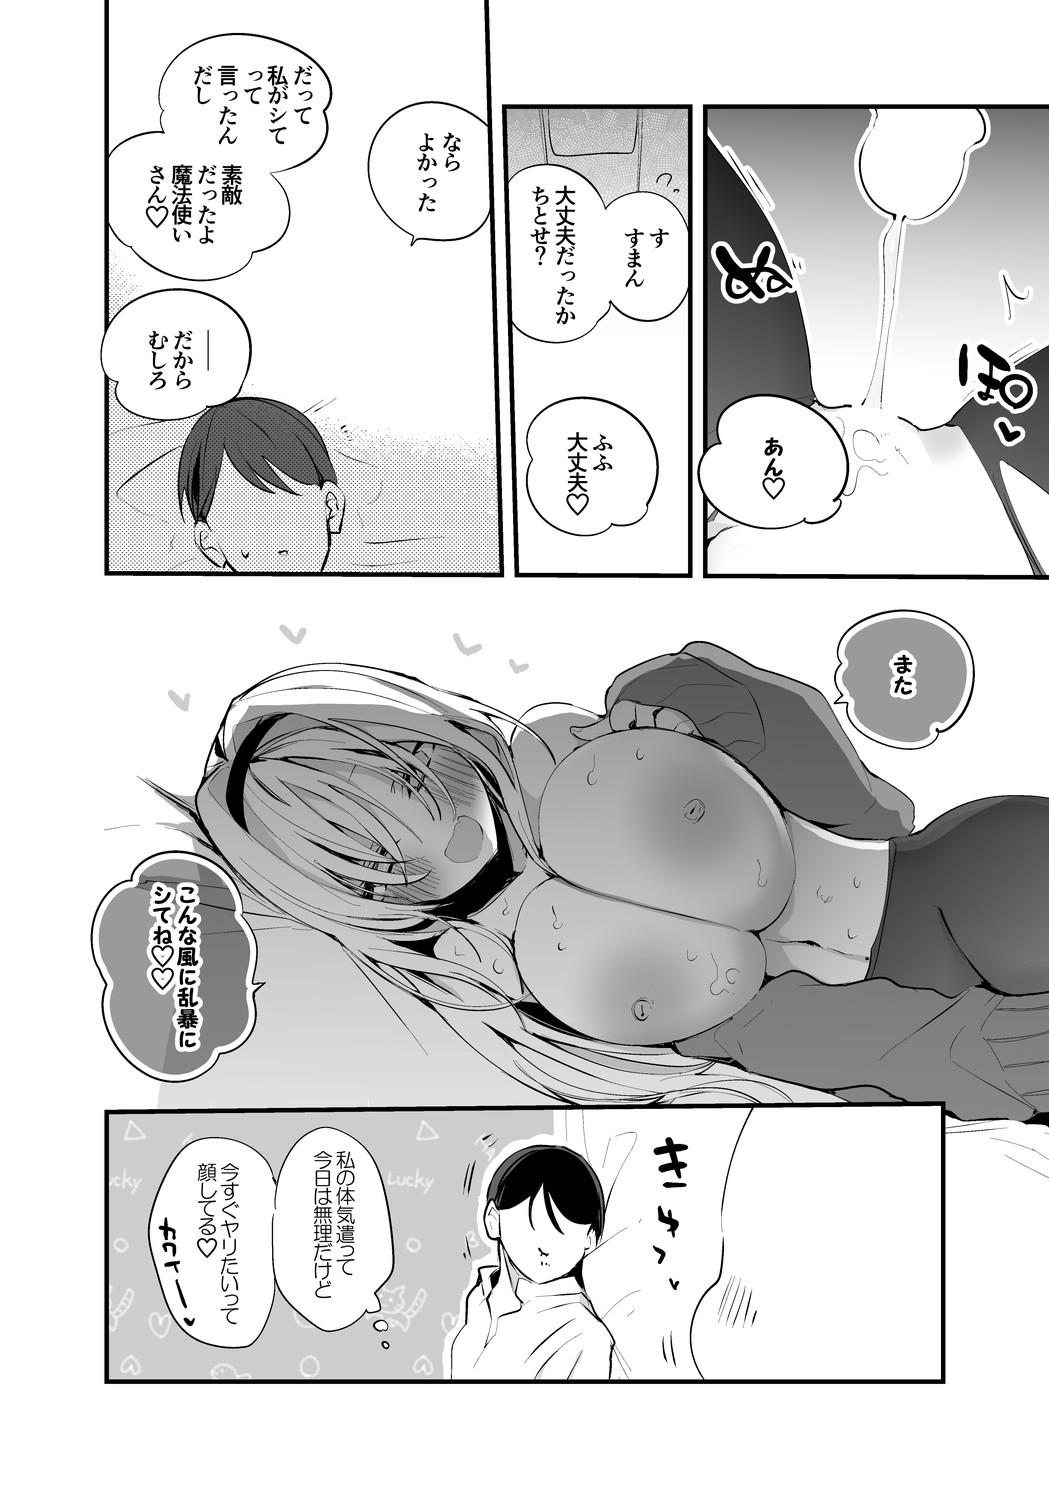 Perra ちとせはもっと激しく編 - The idolmaster High Definition - Page 7